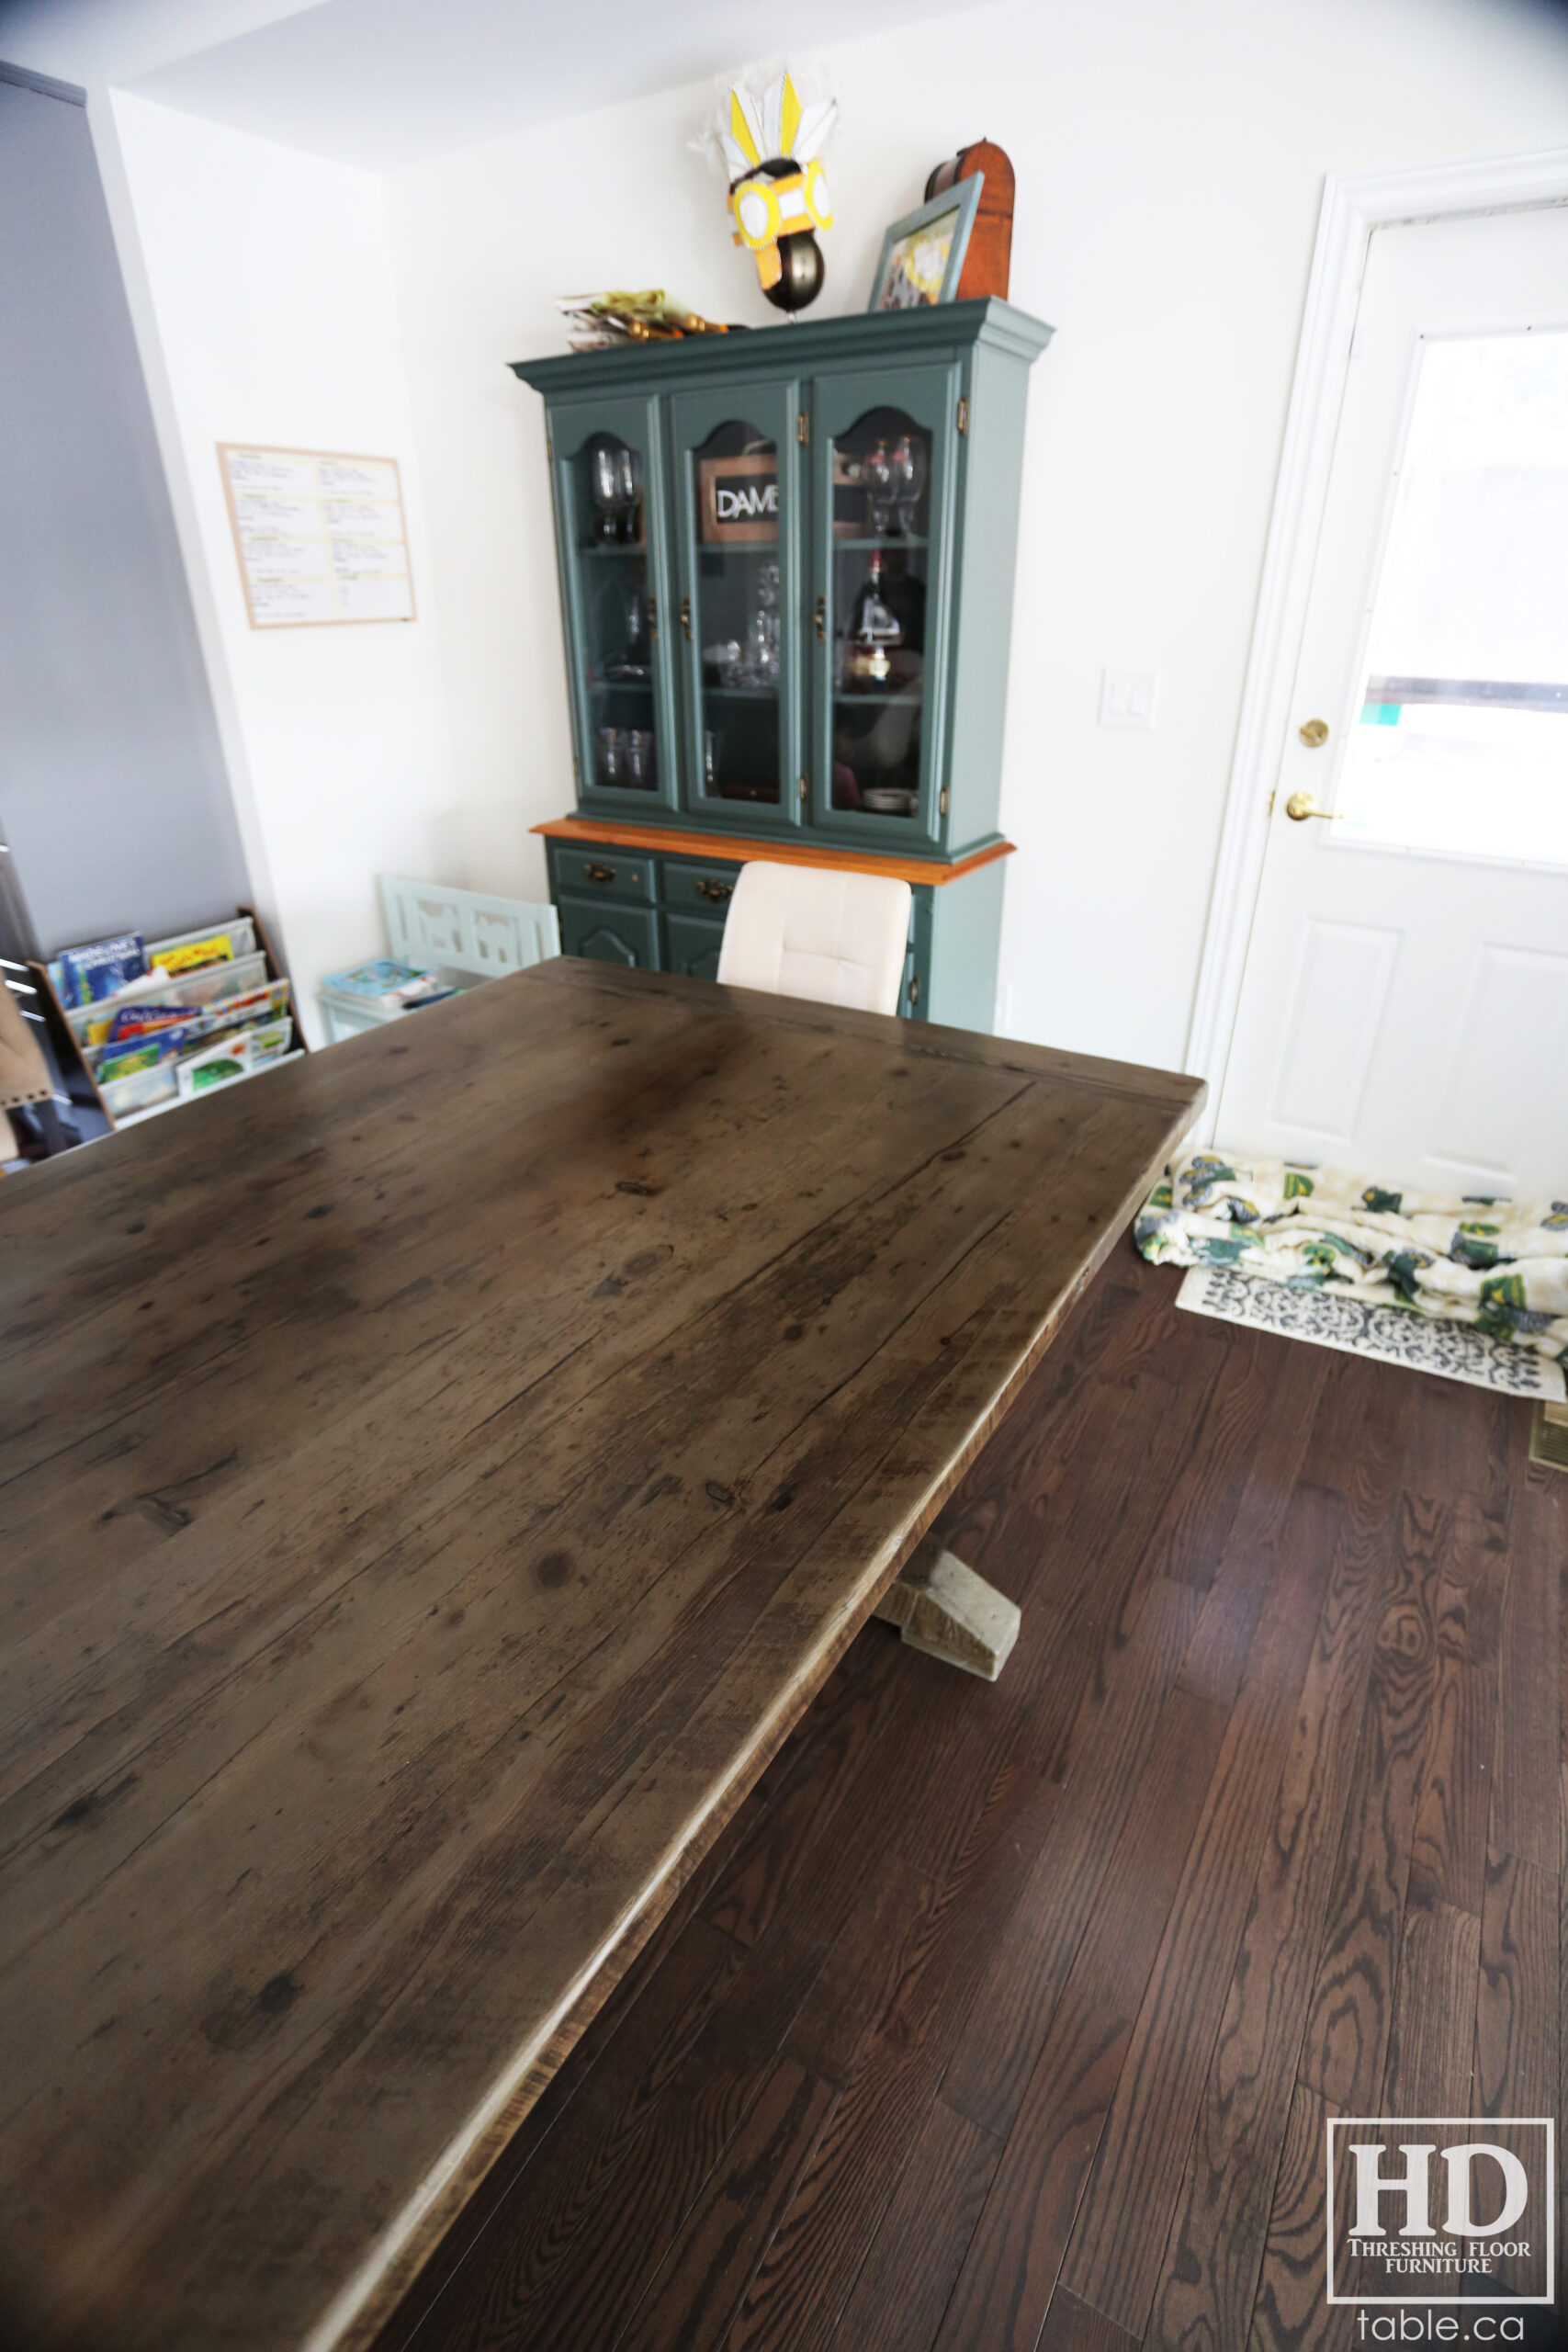 Custom Reclaimed Wood Table with Black Stain Treatment by HD Threshing Floor Furniture / www.table.ca